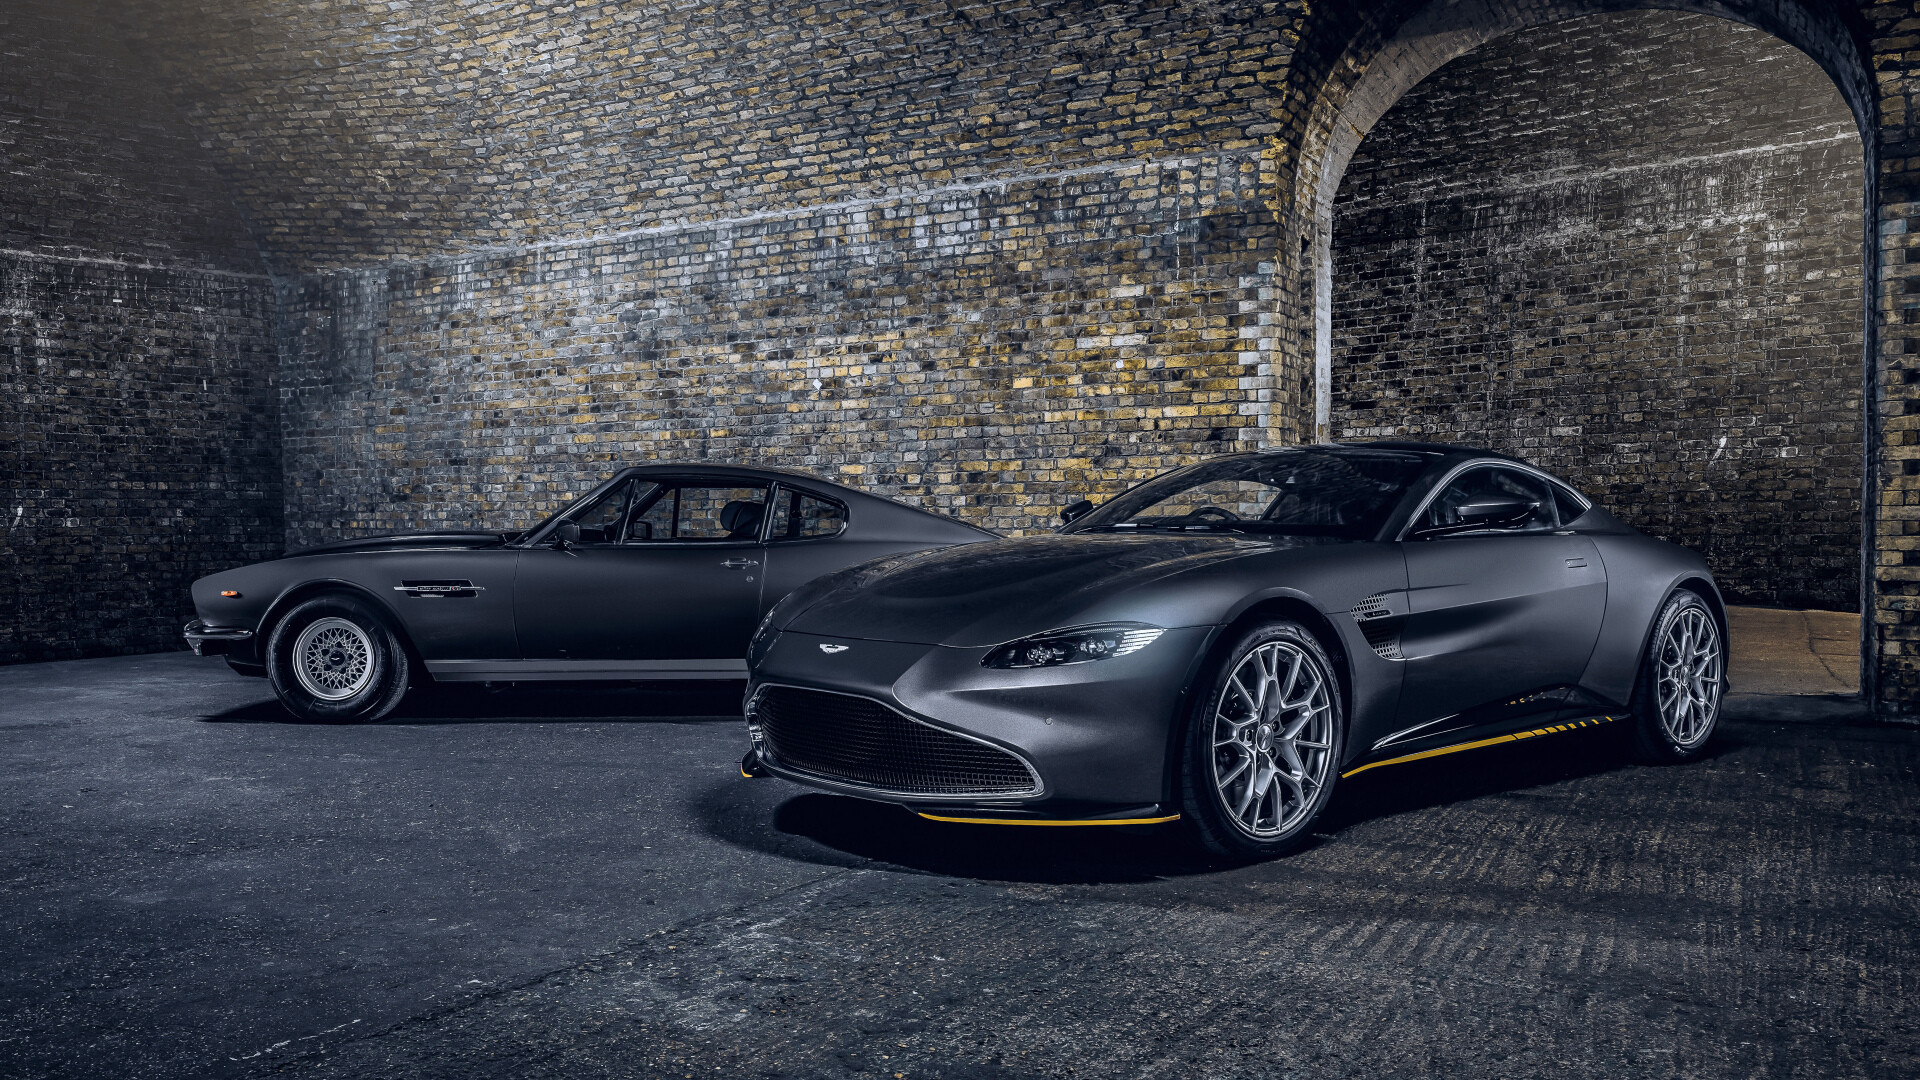 Aston Martin: Famous for the creation of beautiful hand-crafted sports cars, Vantage 007 Edition. 1920x1080 Full HD Wallpaper.